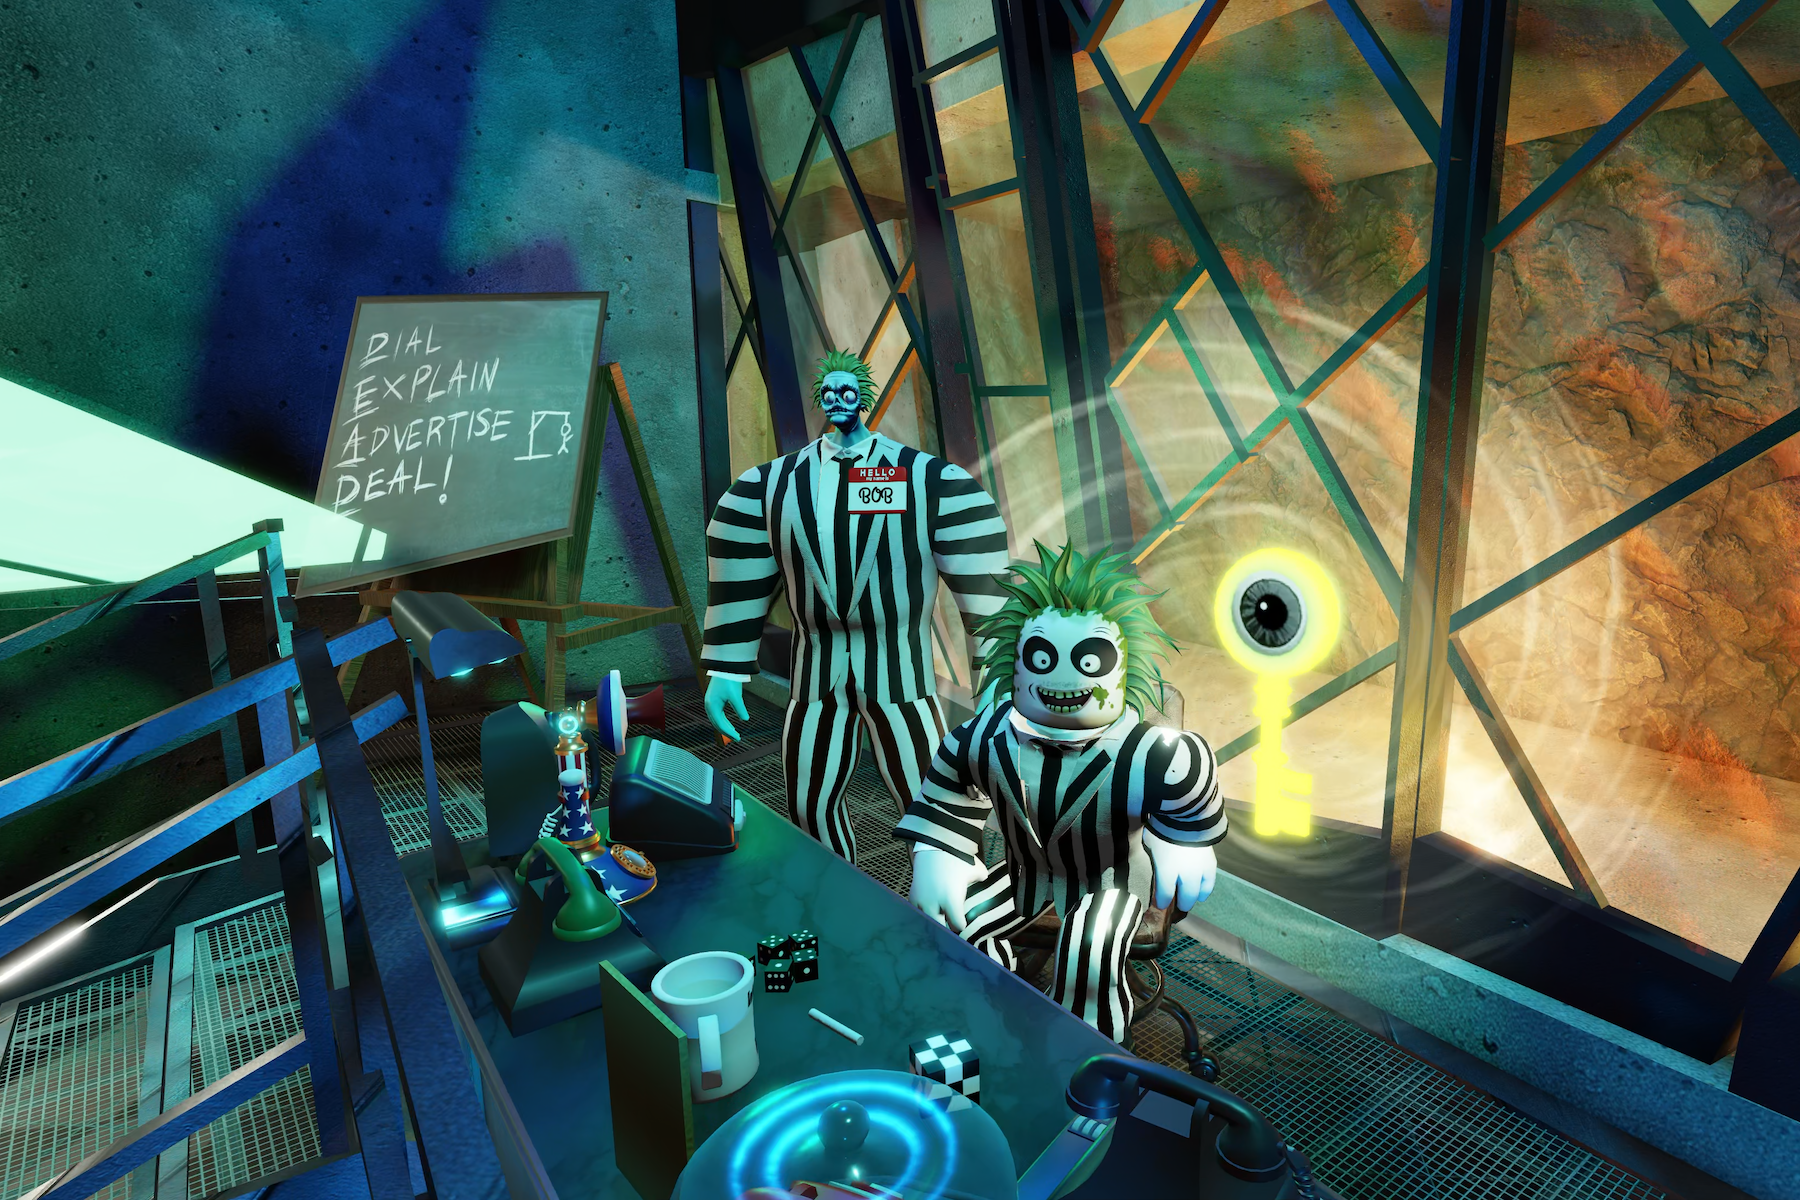 ‘Beetlejuice 2’ Virtual Box Office Launches in Roblox to Sell Real Movie Tickets in Game